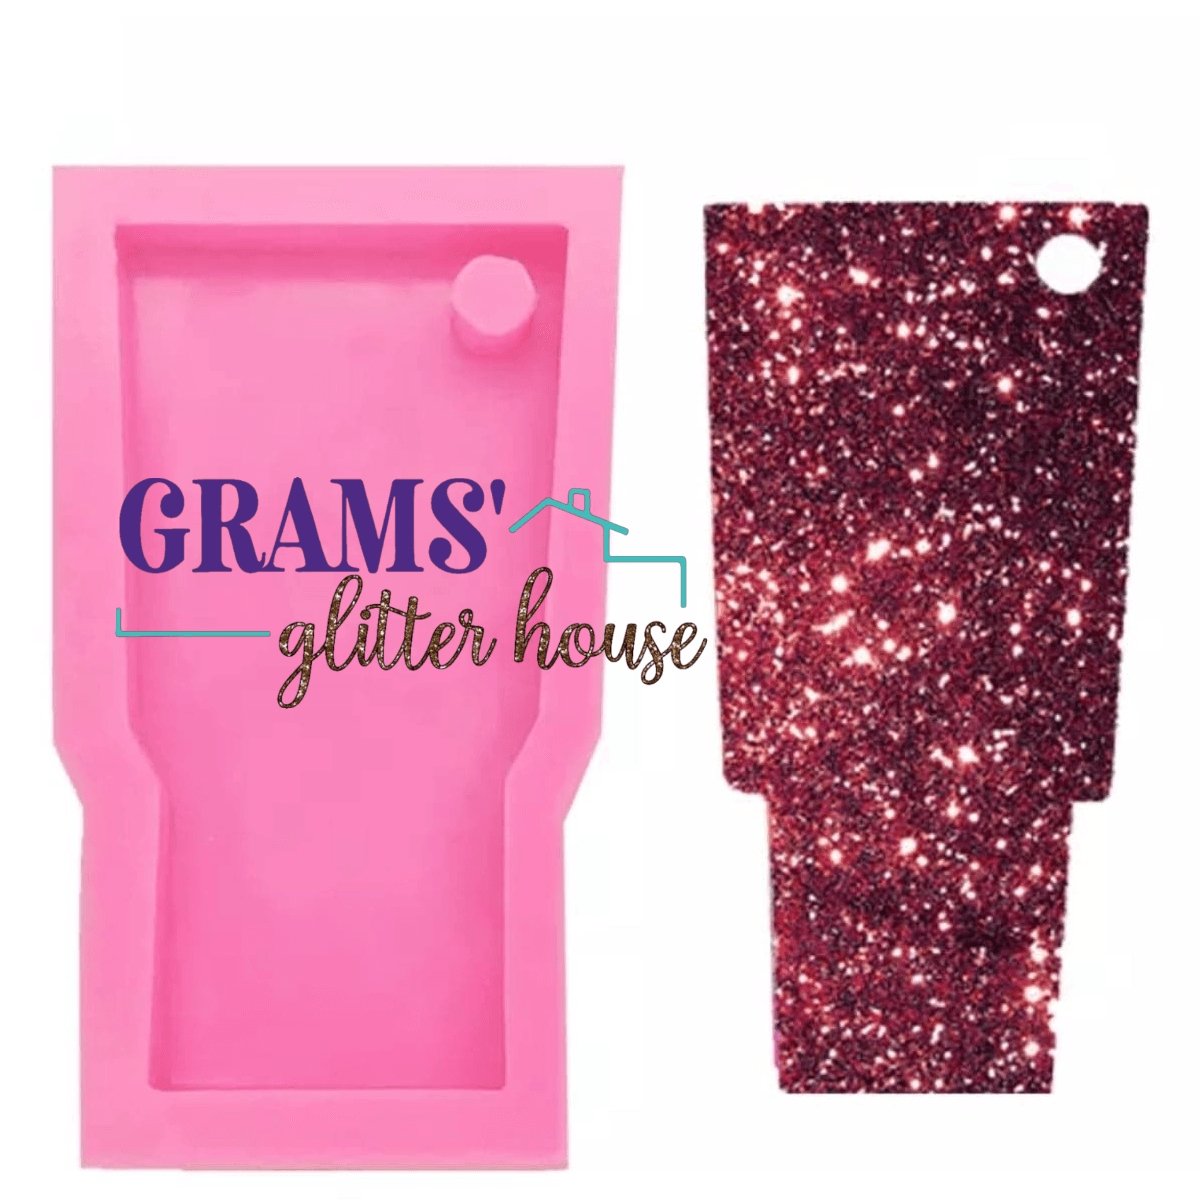 Grams' Glitter House Tumbler Keychain Mold Silicone mold